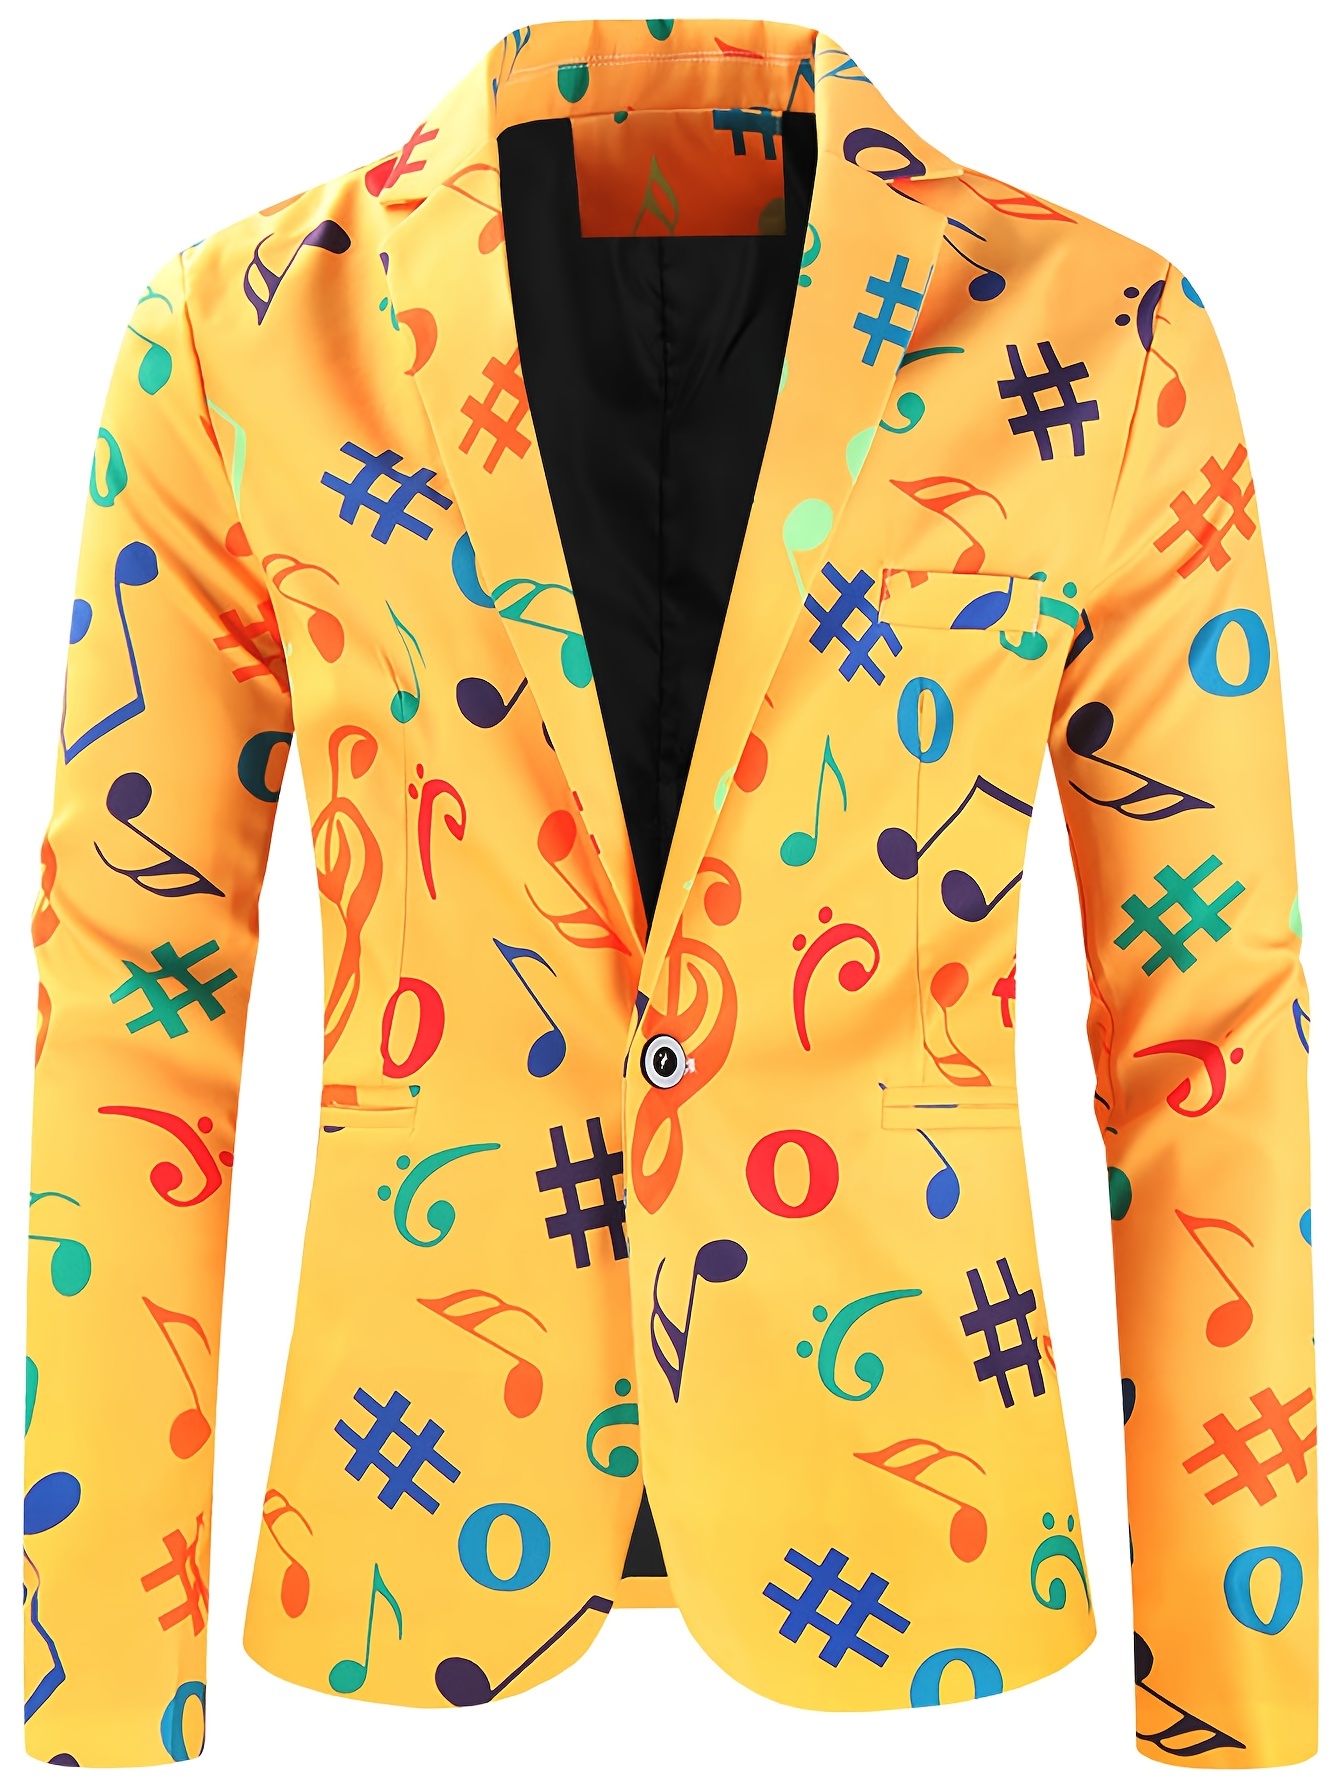 Spring All Over Printed Letter Pattern Jacket Lapel Casual Zipper